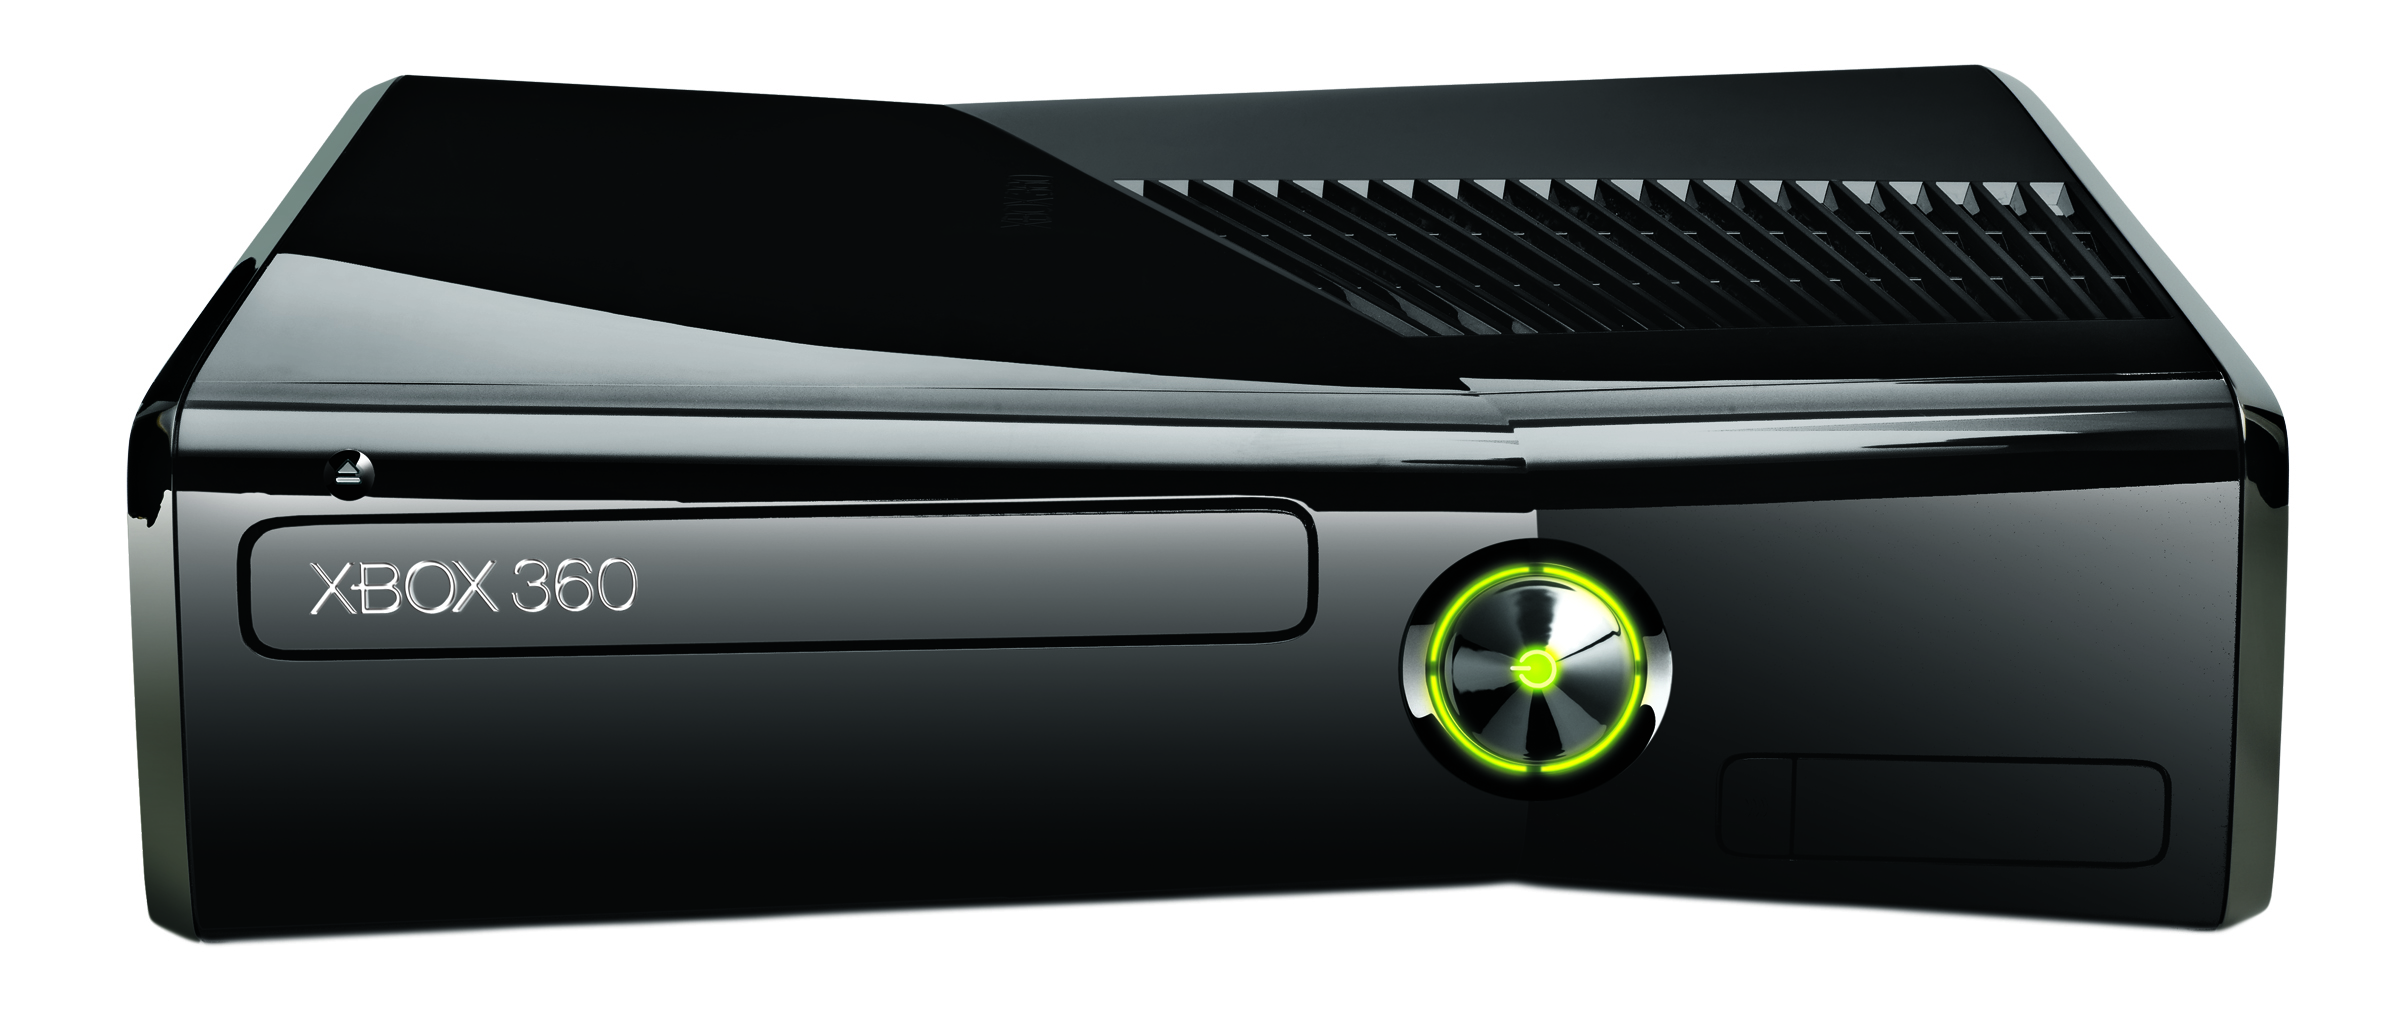 Redesigned and thinner Xbox 360 is launched